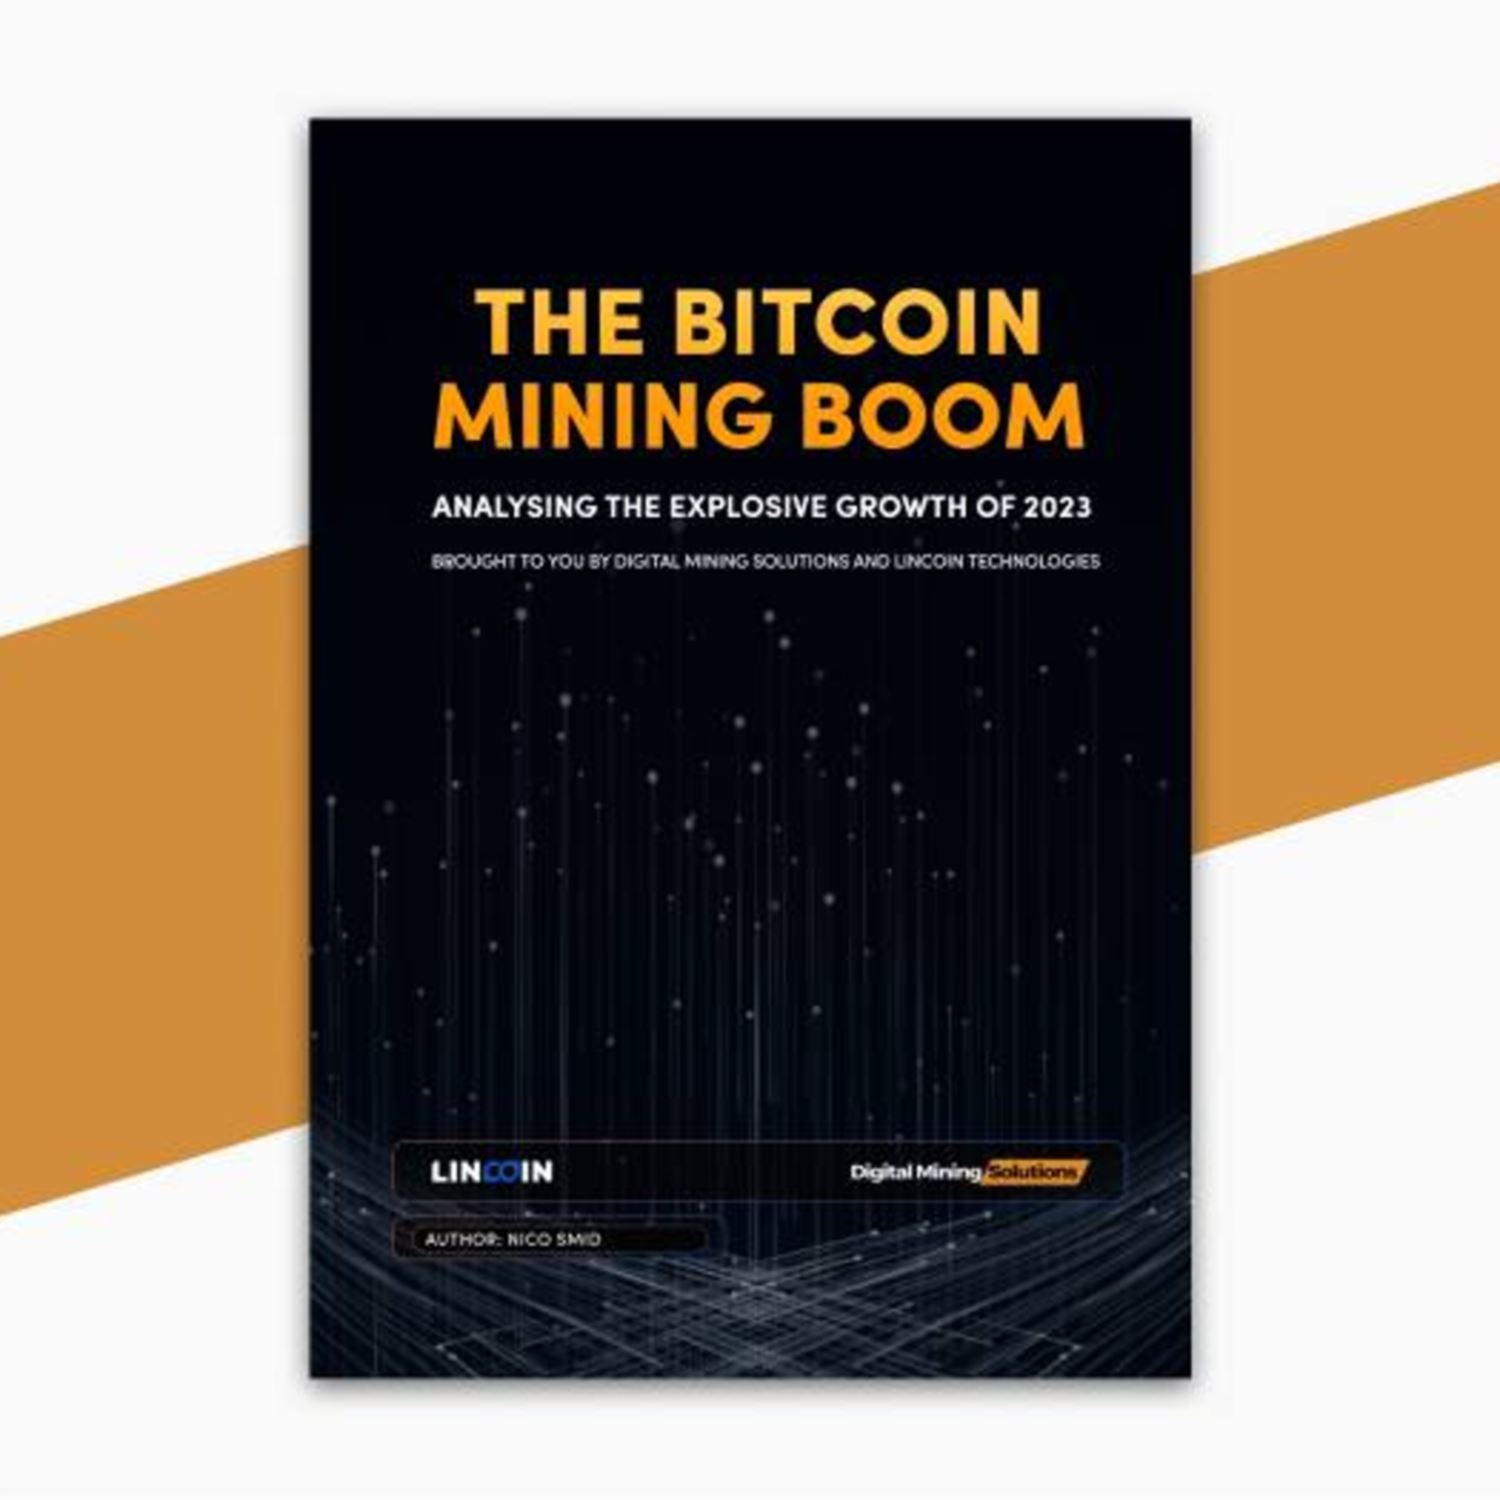 Stats Lens and The Bitcoin Mining Boom